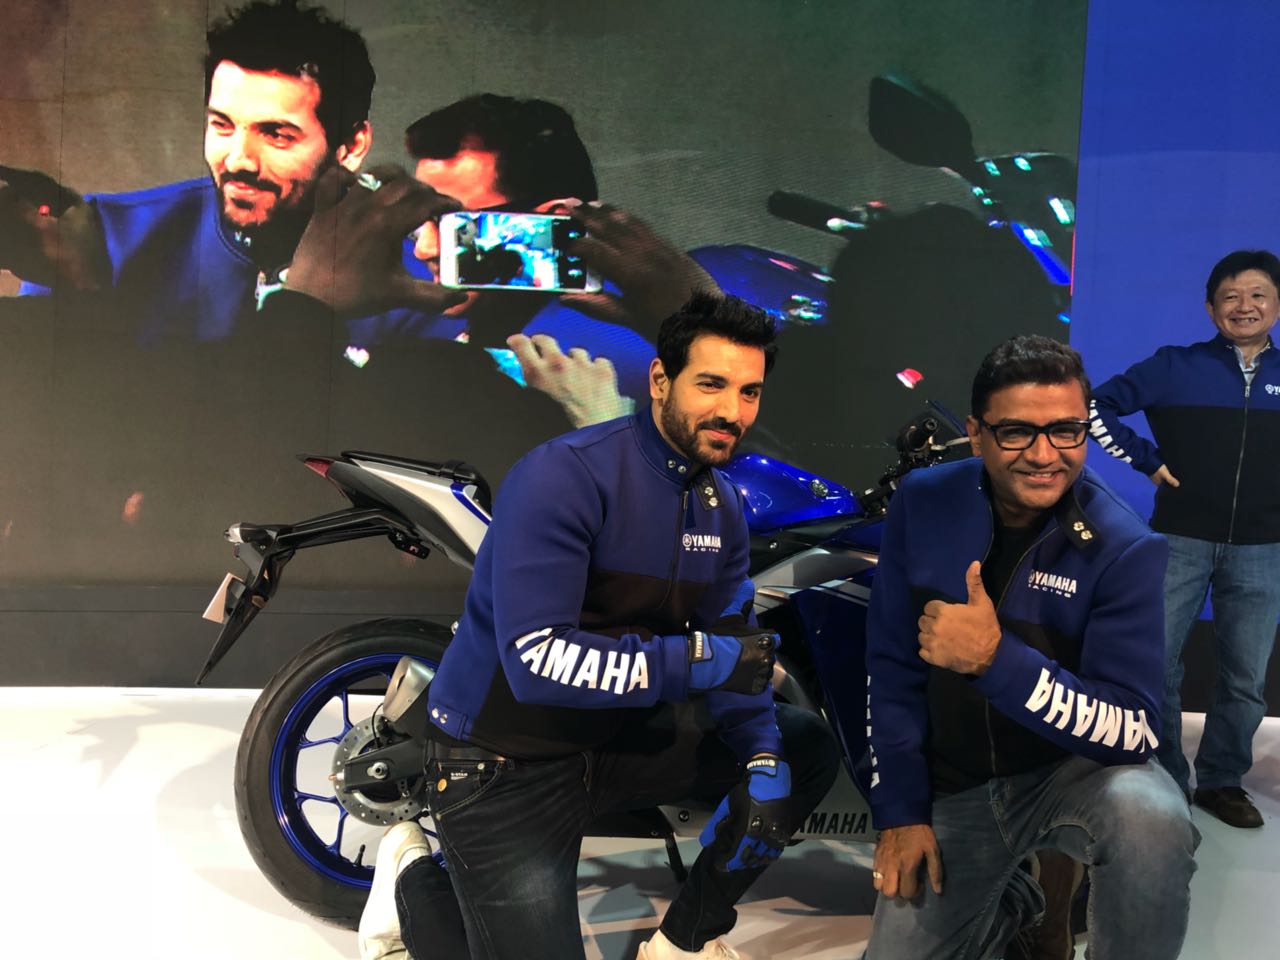 <p>The New Yamaha R3 will be launched with Dual Channel ABS and Metzeler M5 tyres. The Yamaha R3 will be priced at 3.48L, ex-showroom.</p>